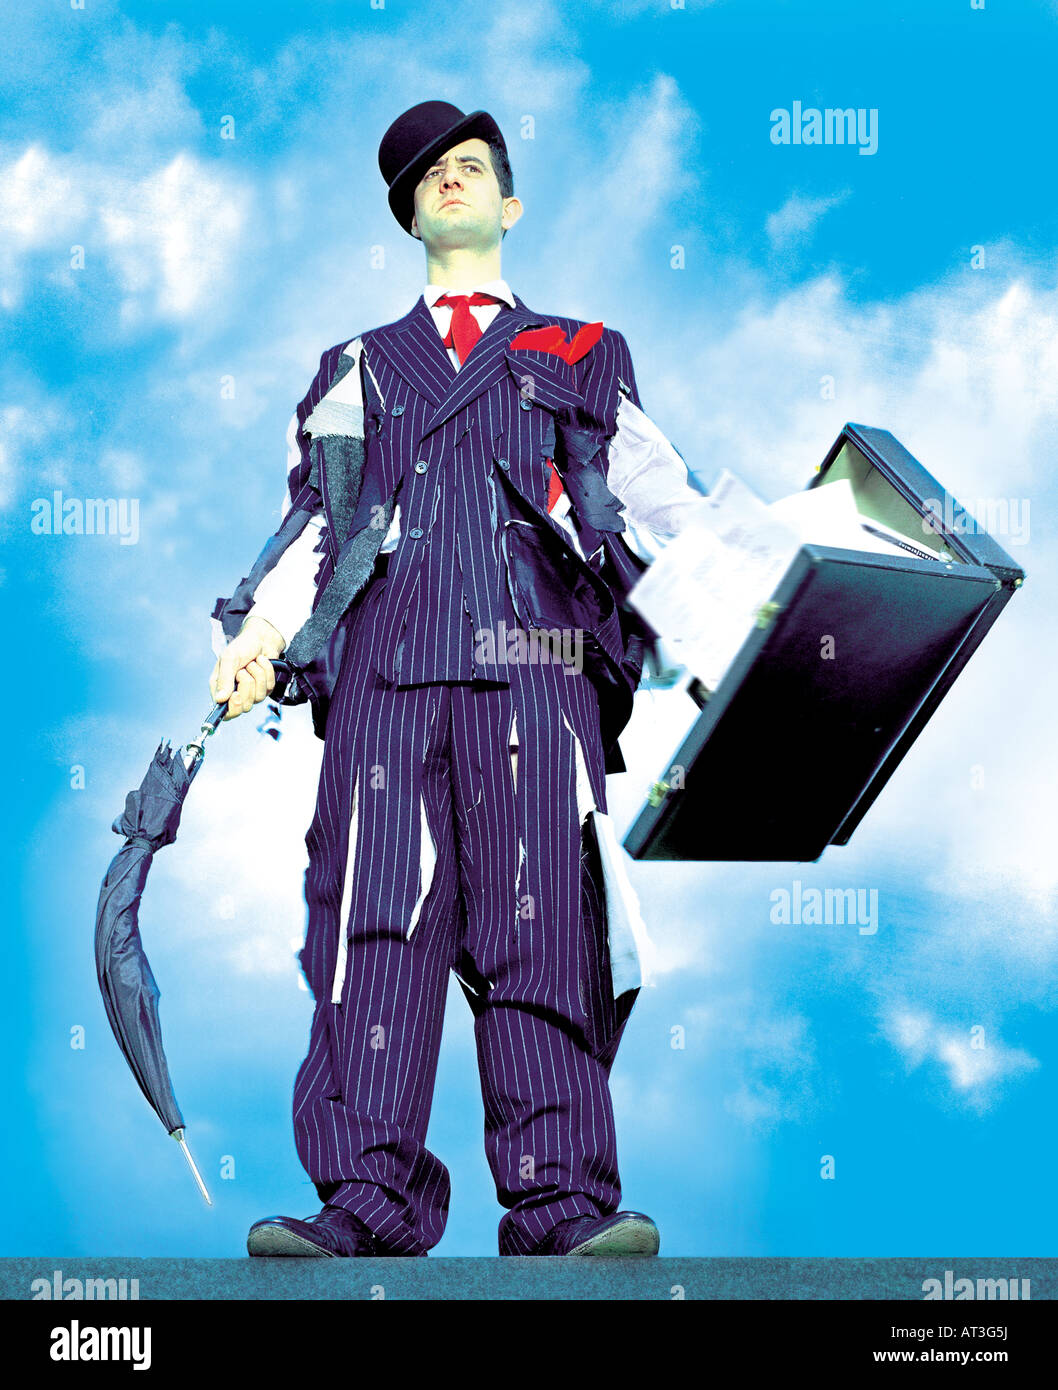 A businessman wearing a tattered suit, holding a briefcase and umbrella Stock Photo